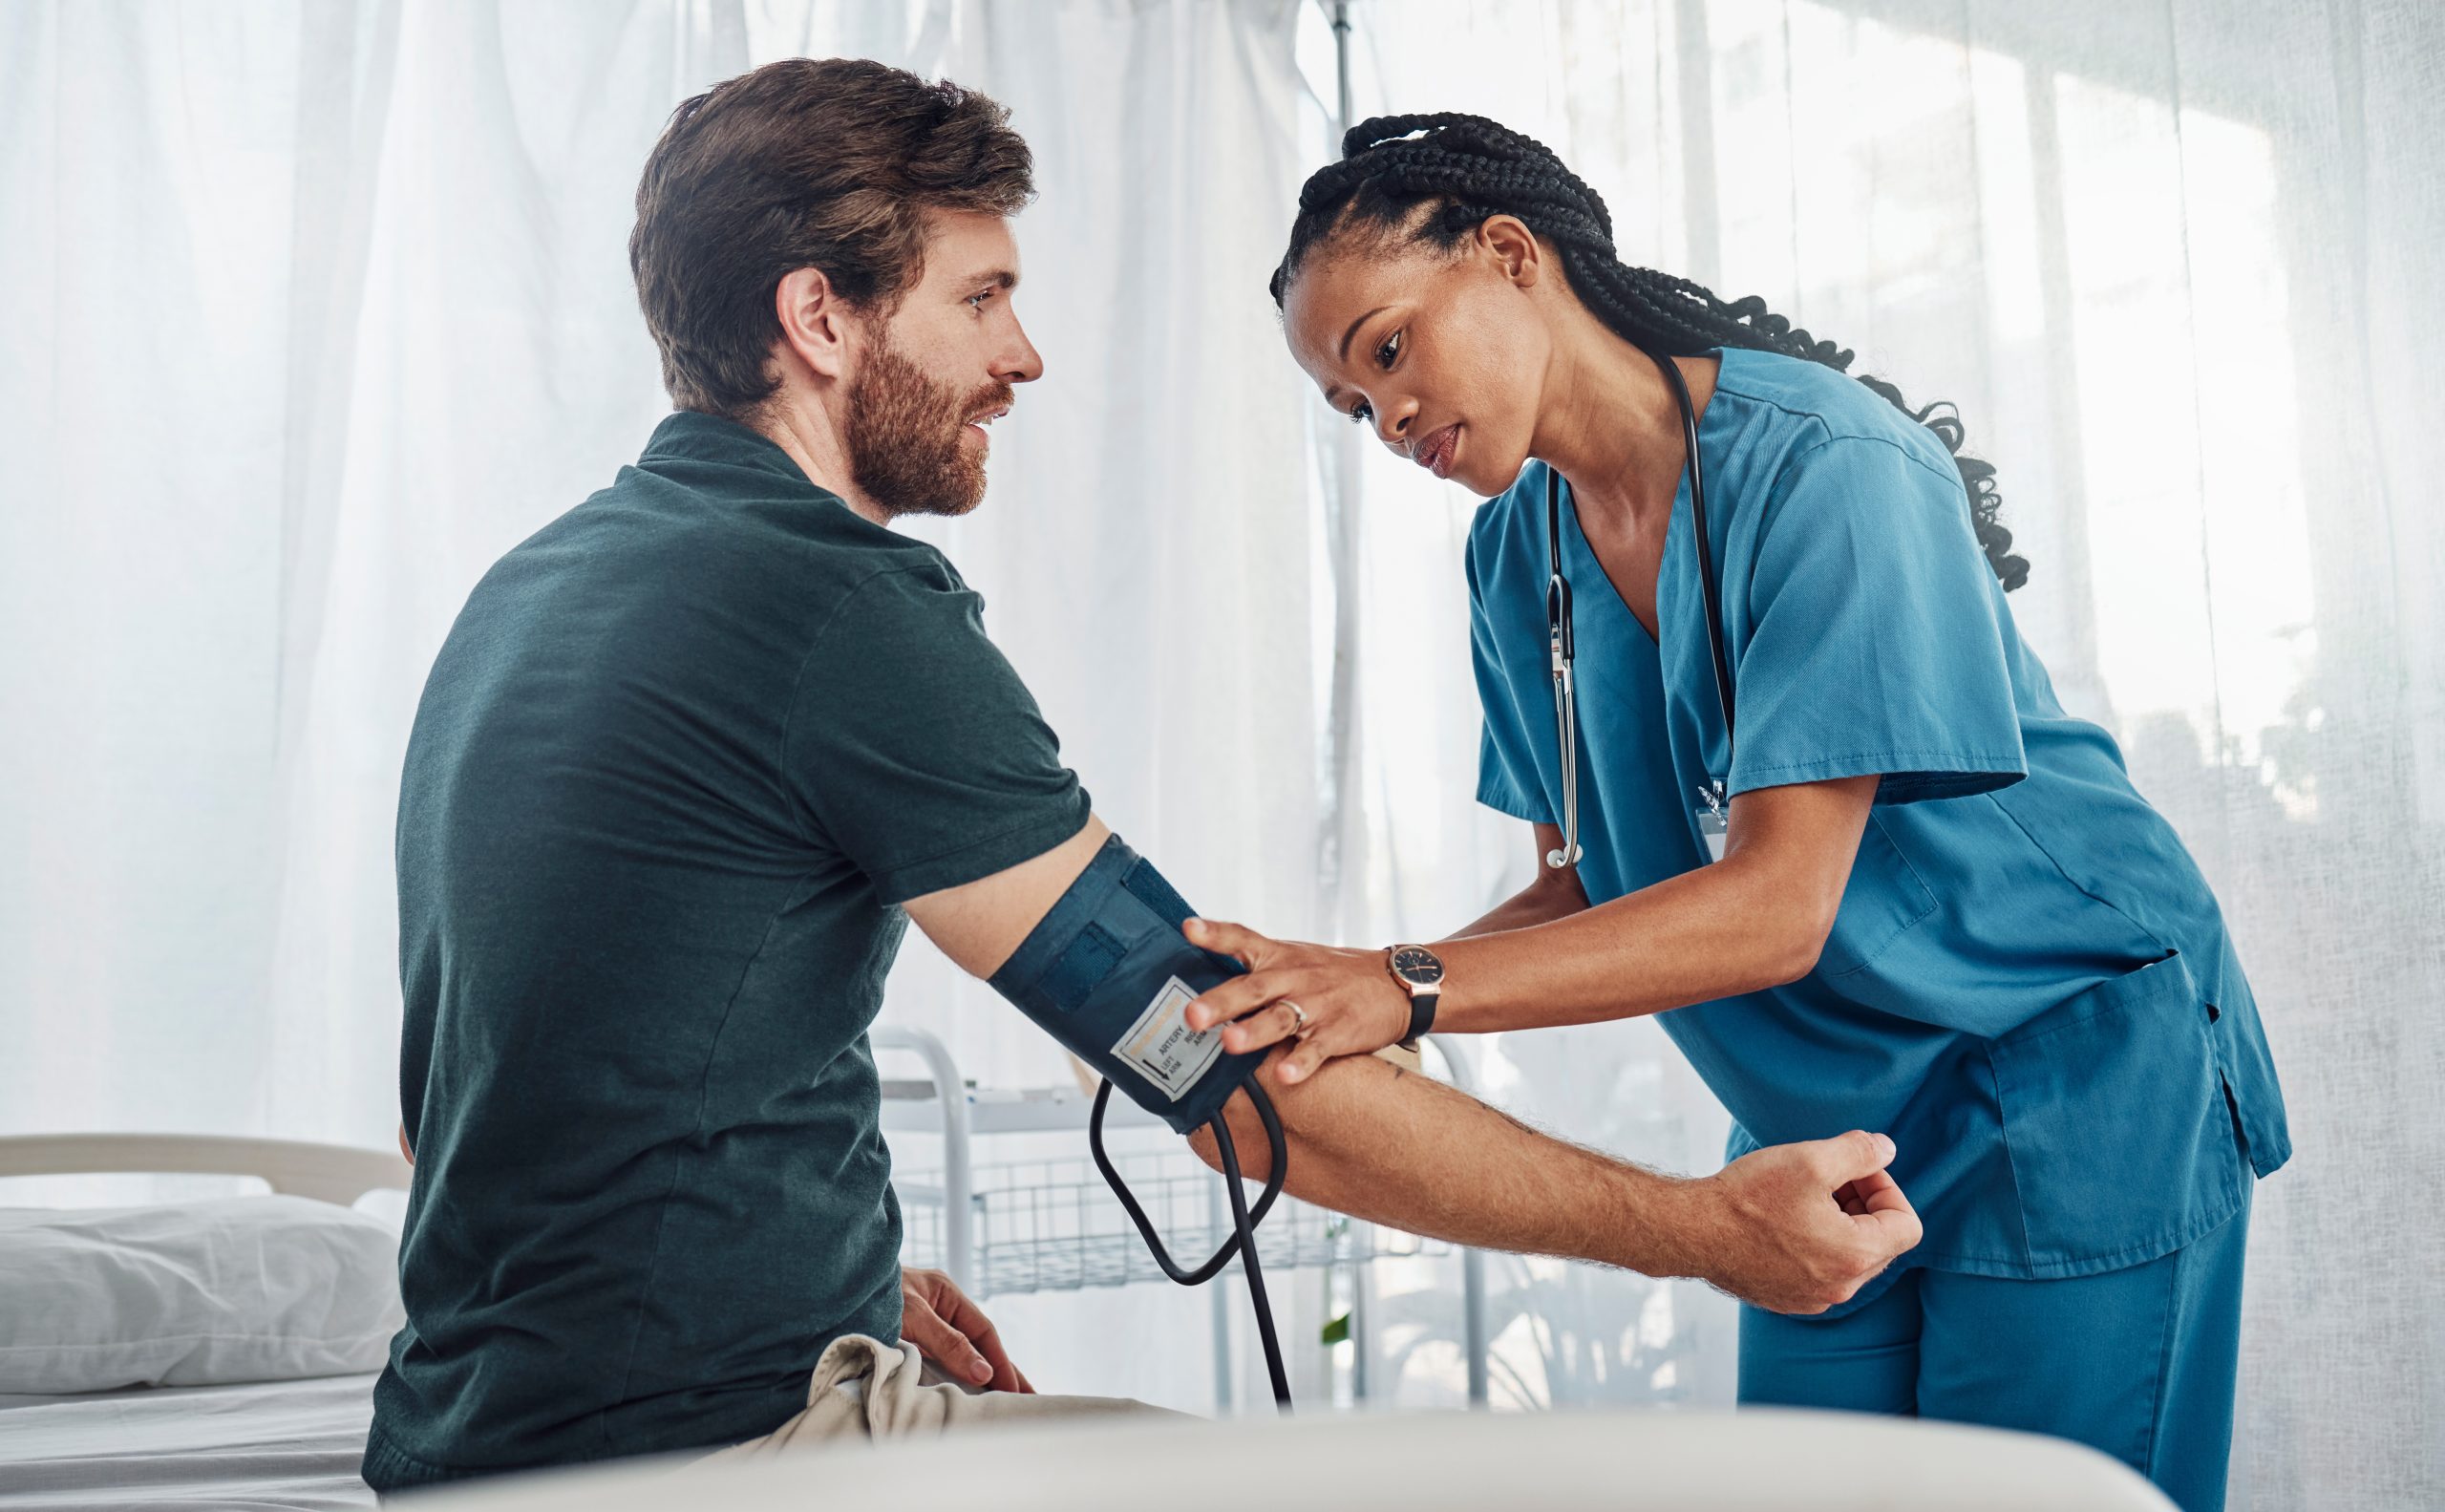 Nurse and man with blood pressure test in hospital for heart health or wellness. 